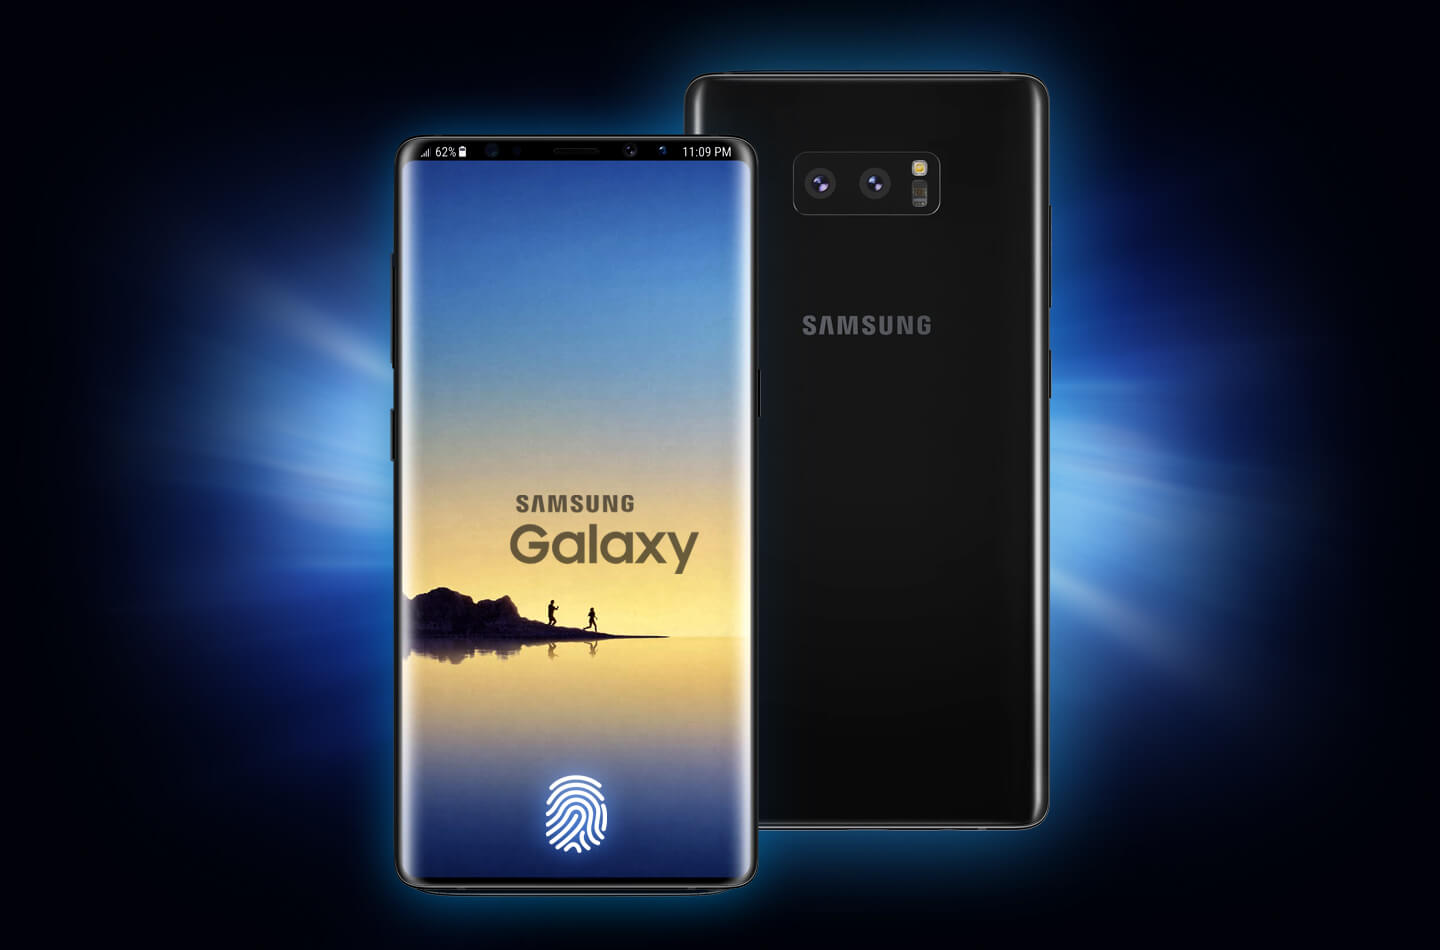 Note 9 plus. Samsung Galaxy Note 9. Note 9 Samsung габариты. Самсунг галакси нот 9 Размеры. Samsung Galaxy s Note.